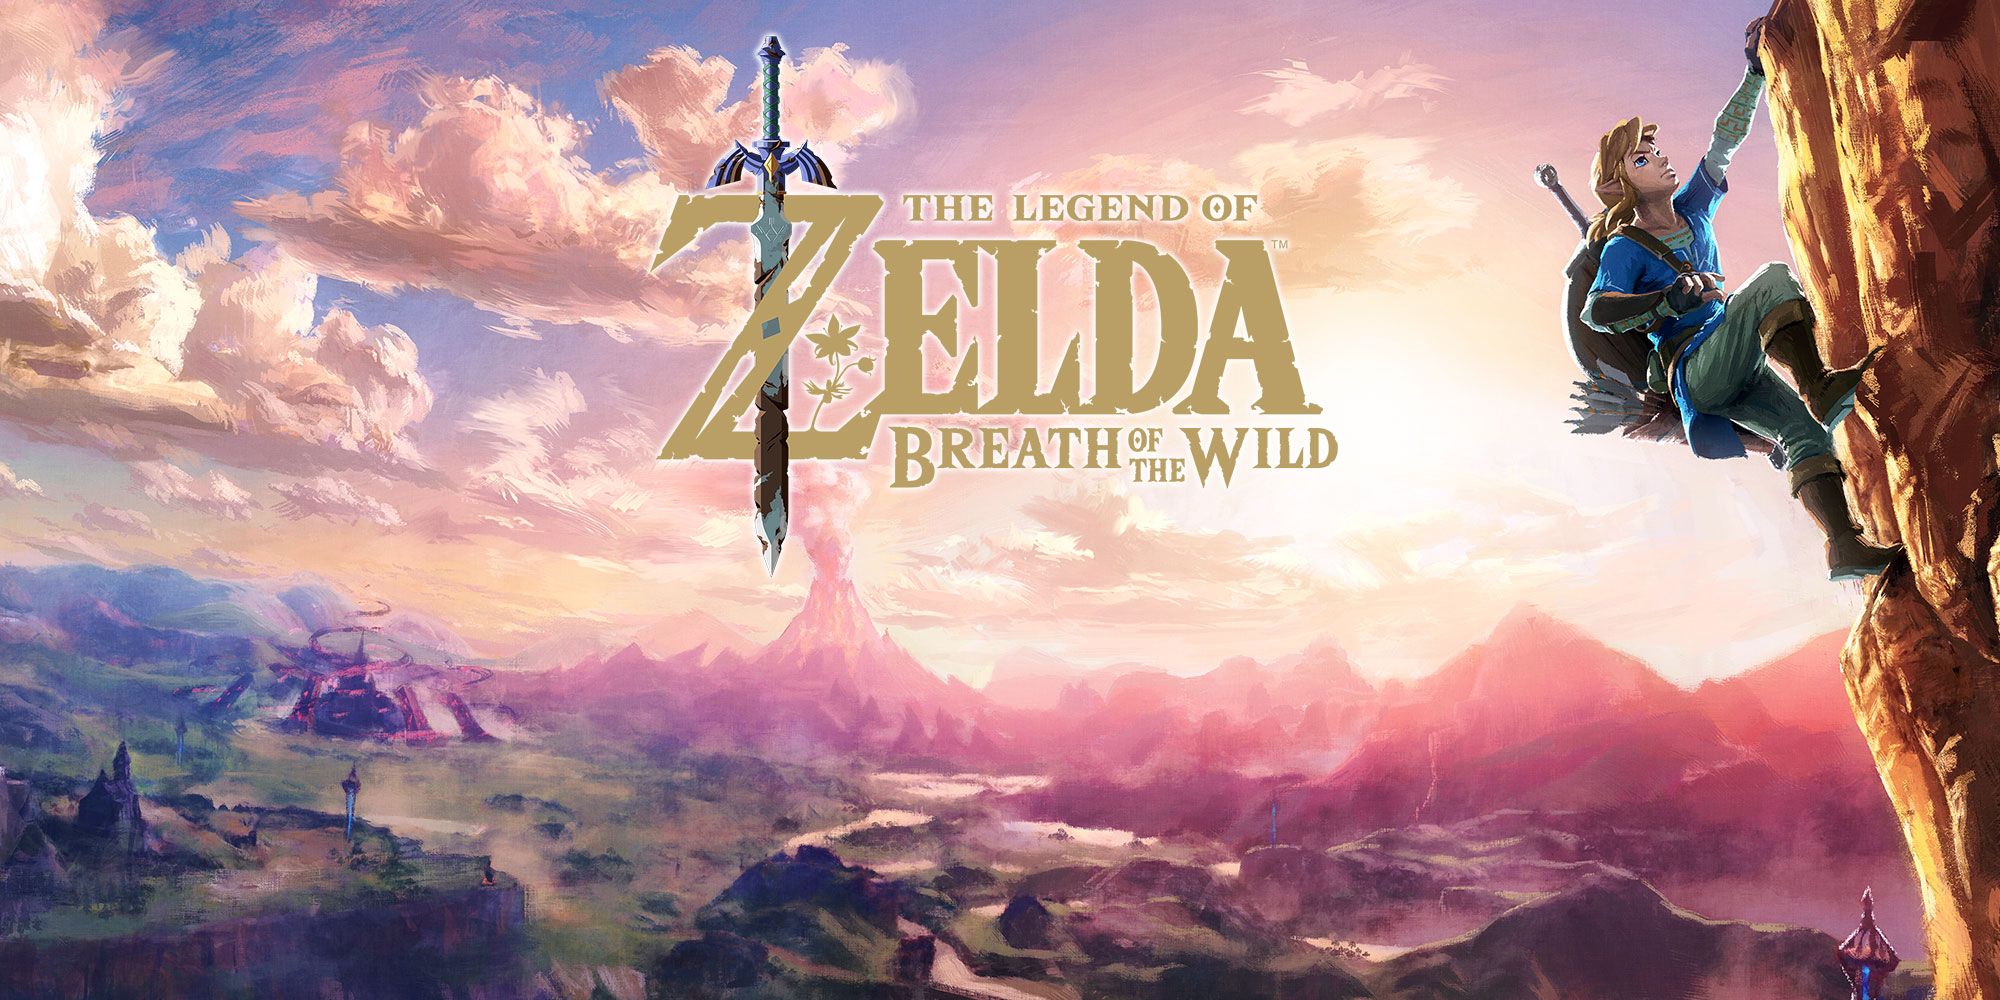 2017 GOTY (Game of the Year), The Legends of Zelda Breath of the Wild